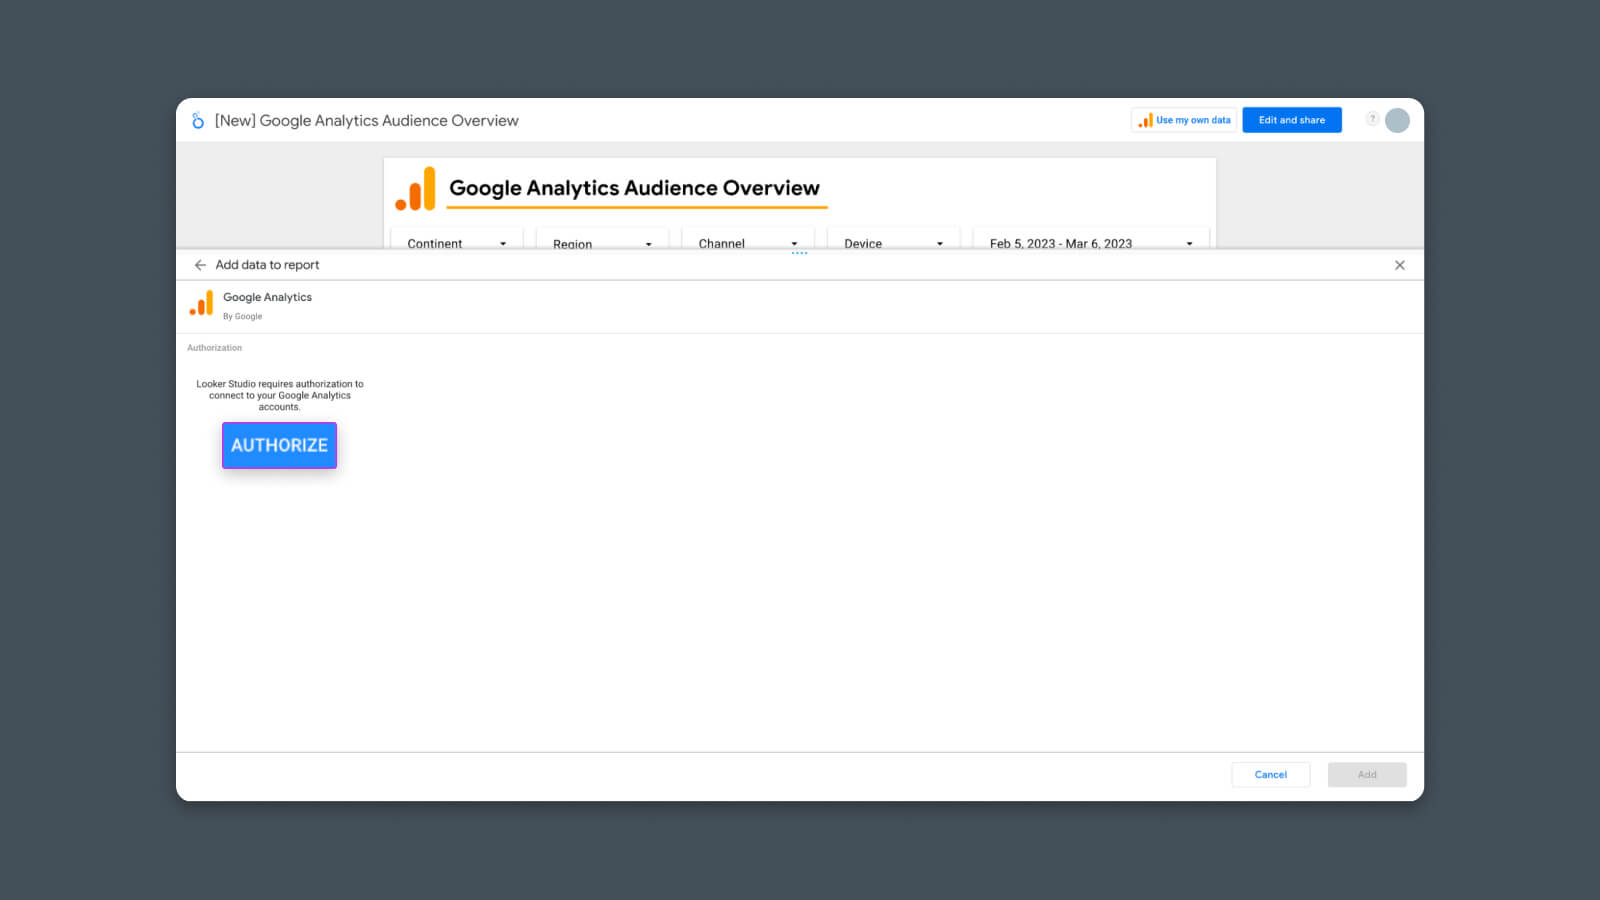 You should see a new screen asking you to authorize Google Analytics access for Looker Studio. Click the “Authorize” button to allows Looker Studio to access your analytics data.